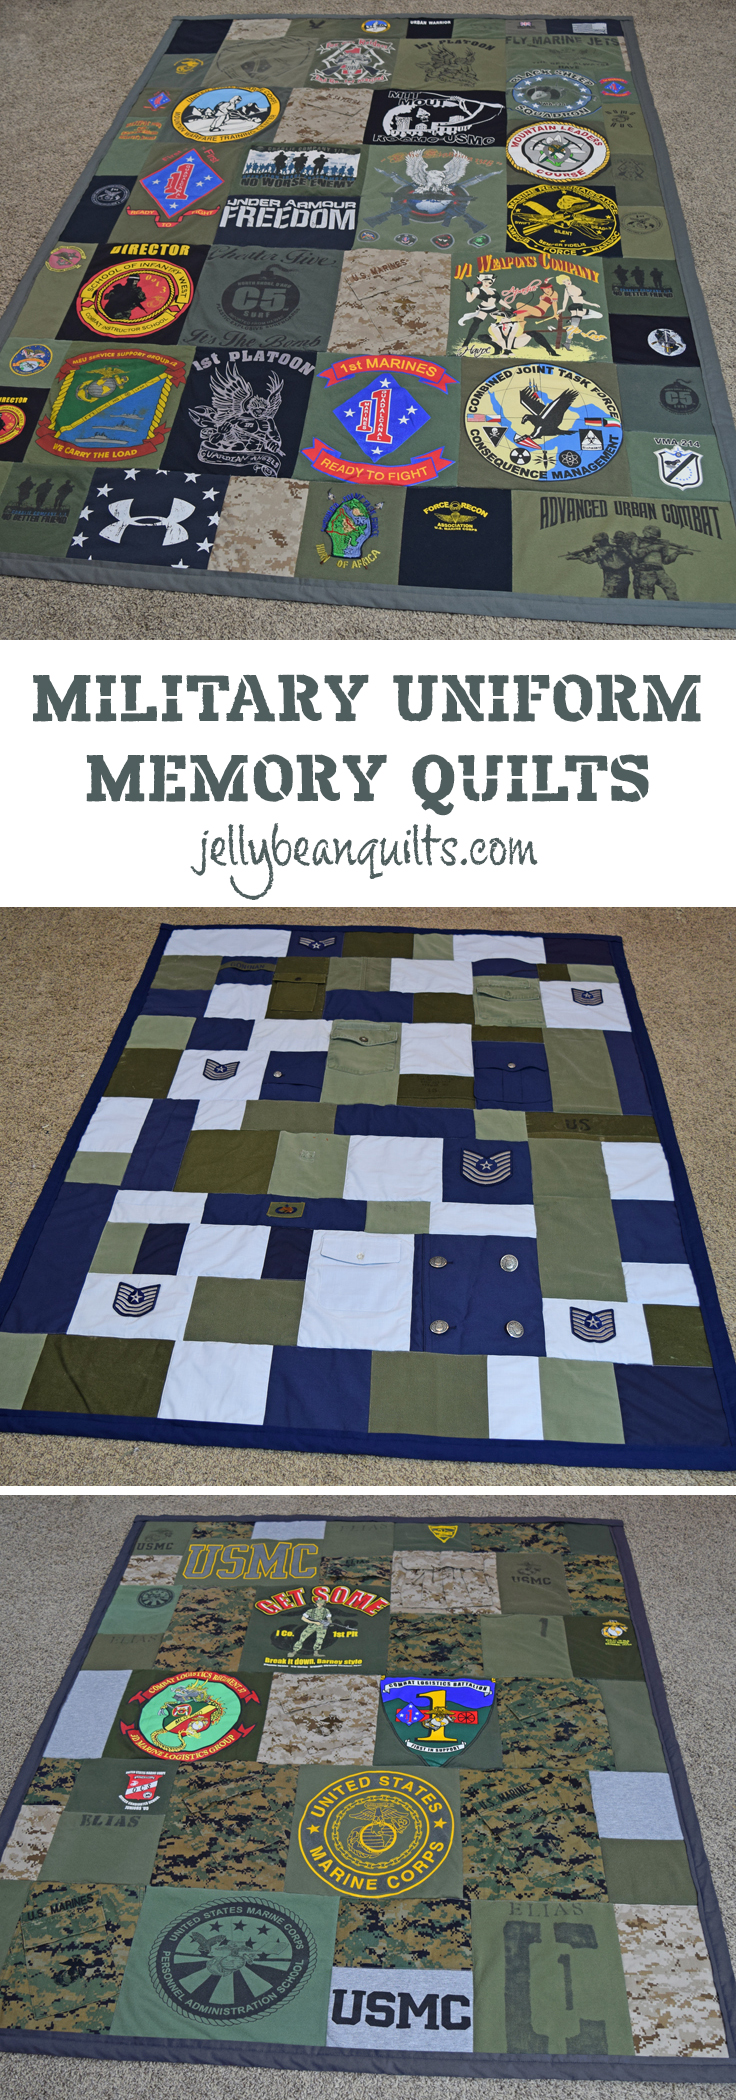 Love this idea - military memory quilt! Military quilt made with old uniforms & t-shirts from jellybeanquilts.com